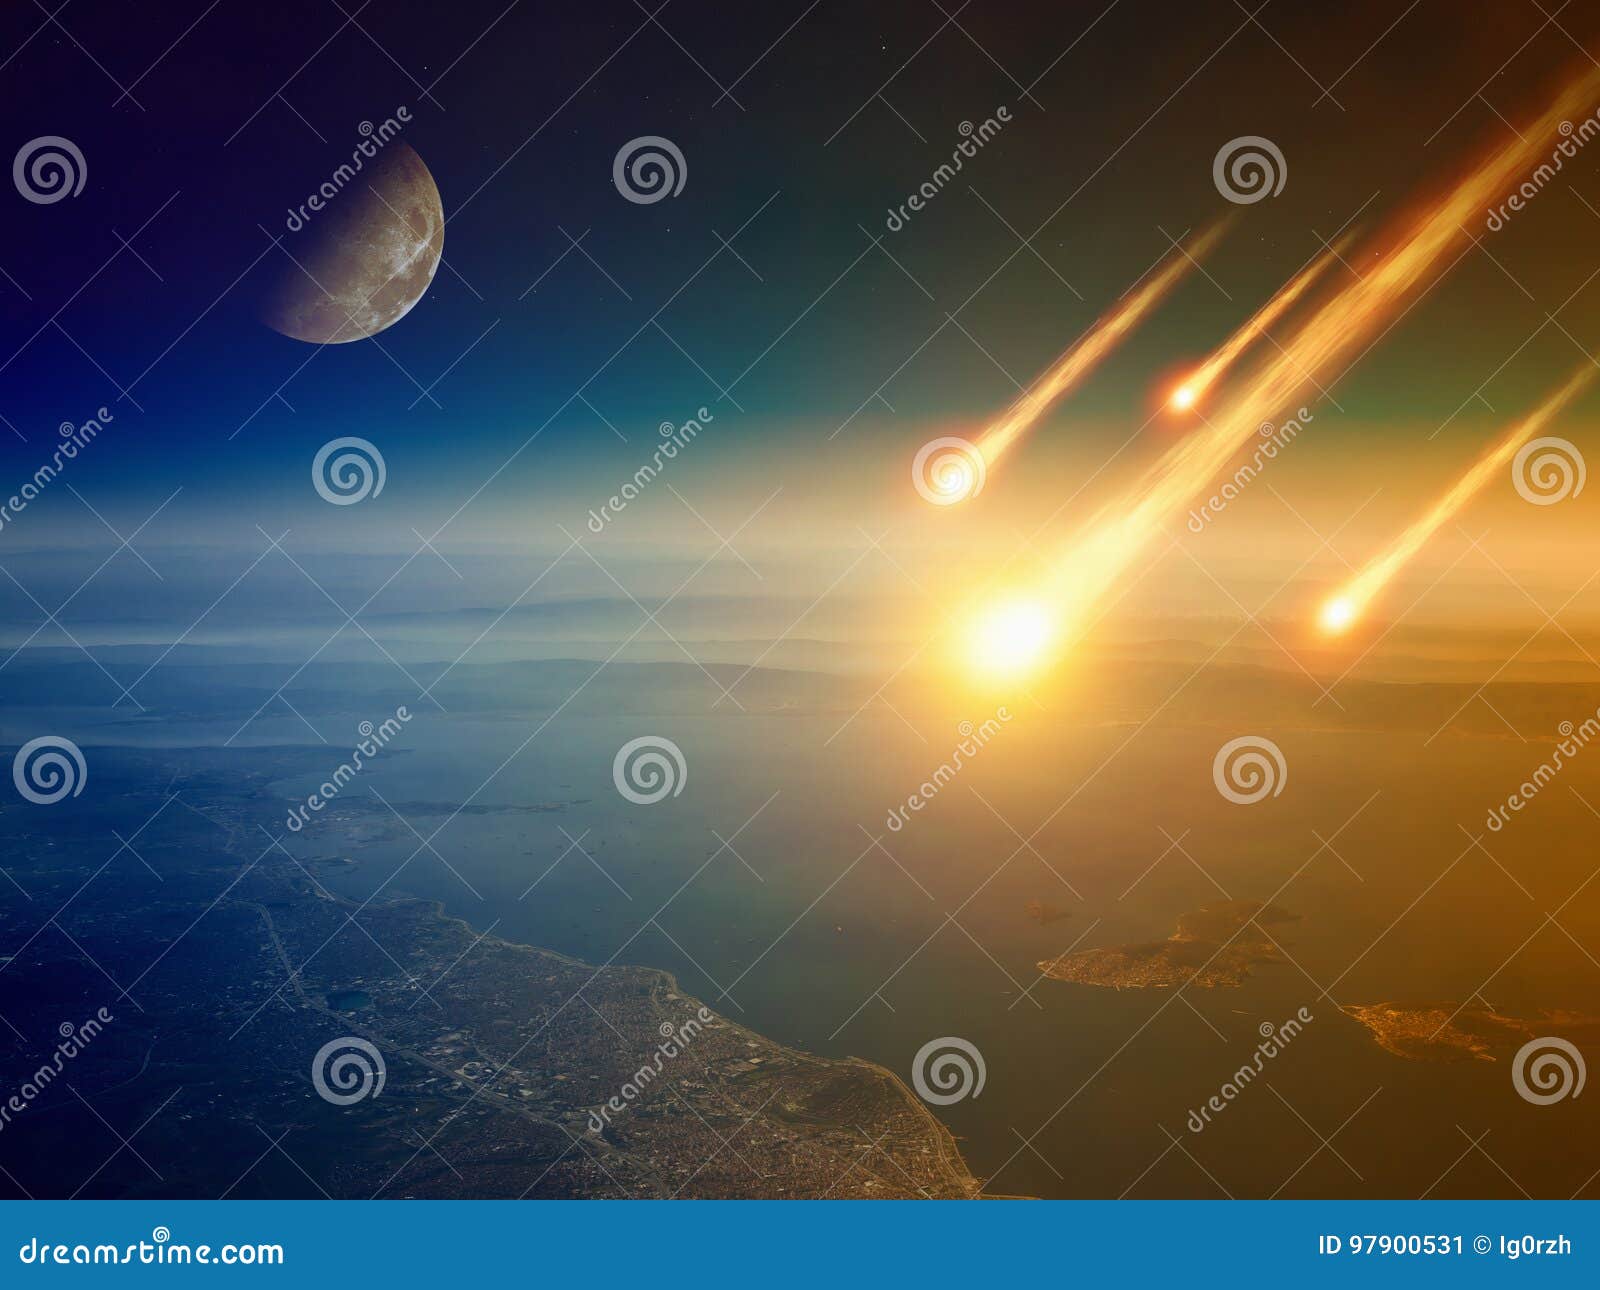 apocalyptic background - asteroid impact, end of world, judgmen